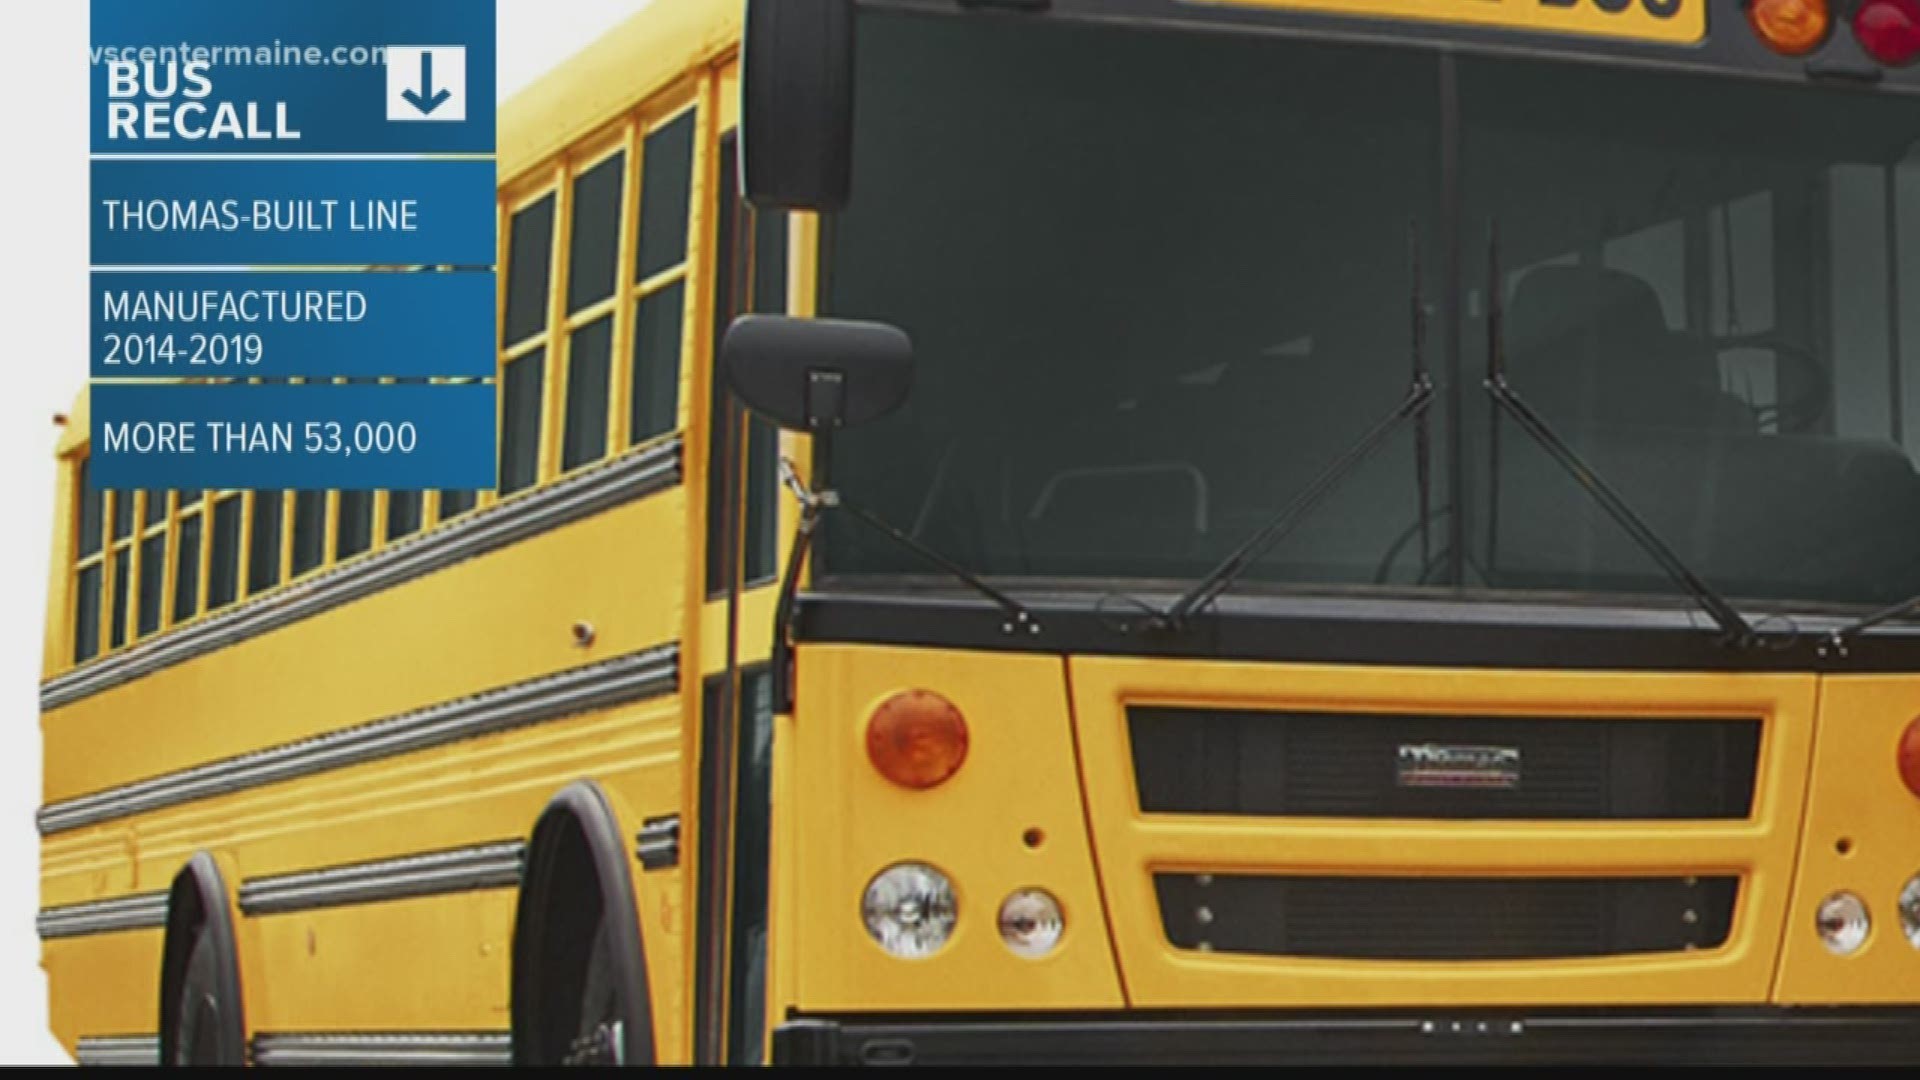 The U.S. Department of Transportation has ordered the recall of four models of school buses.